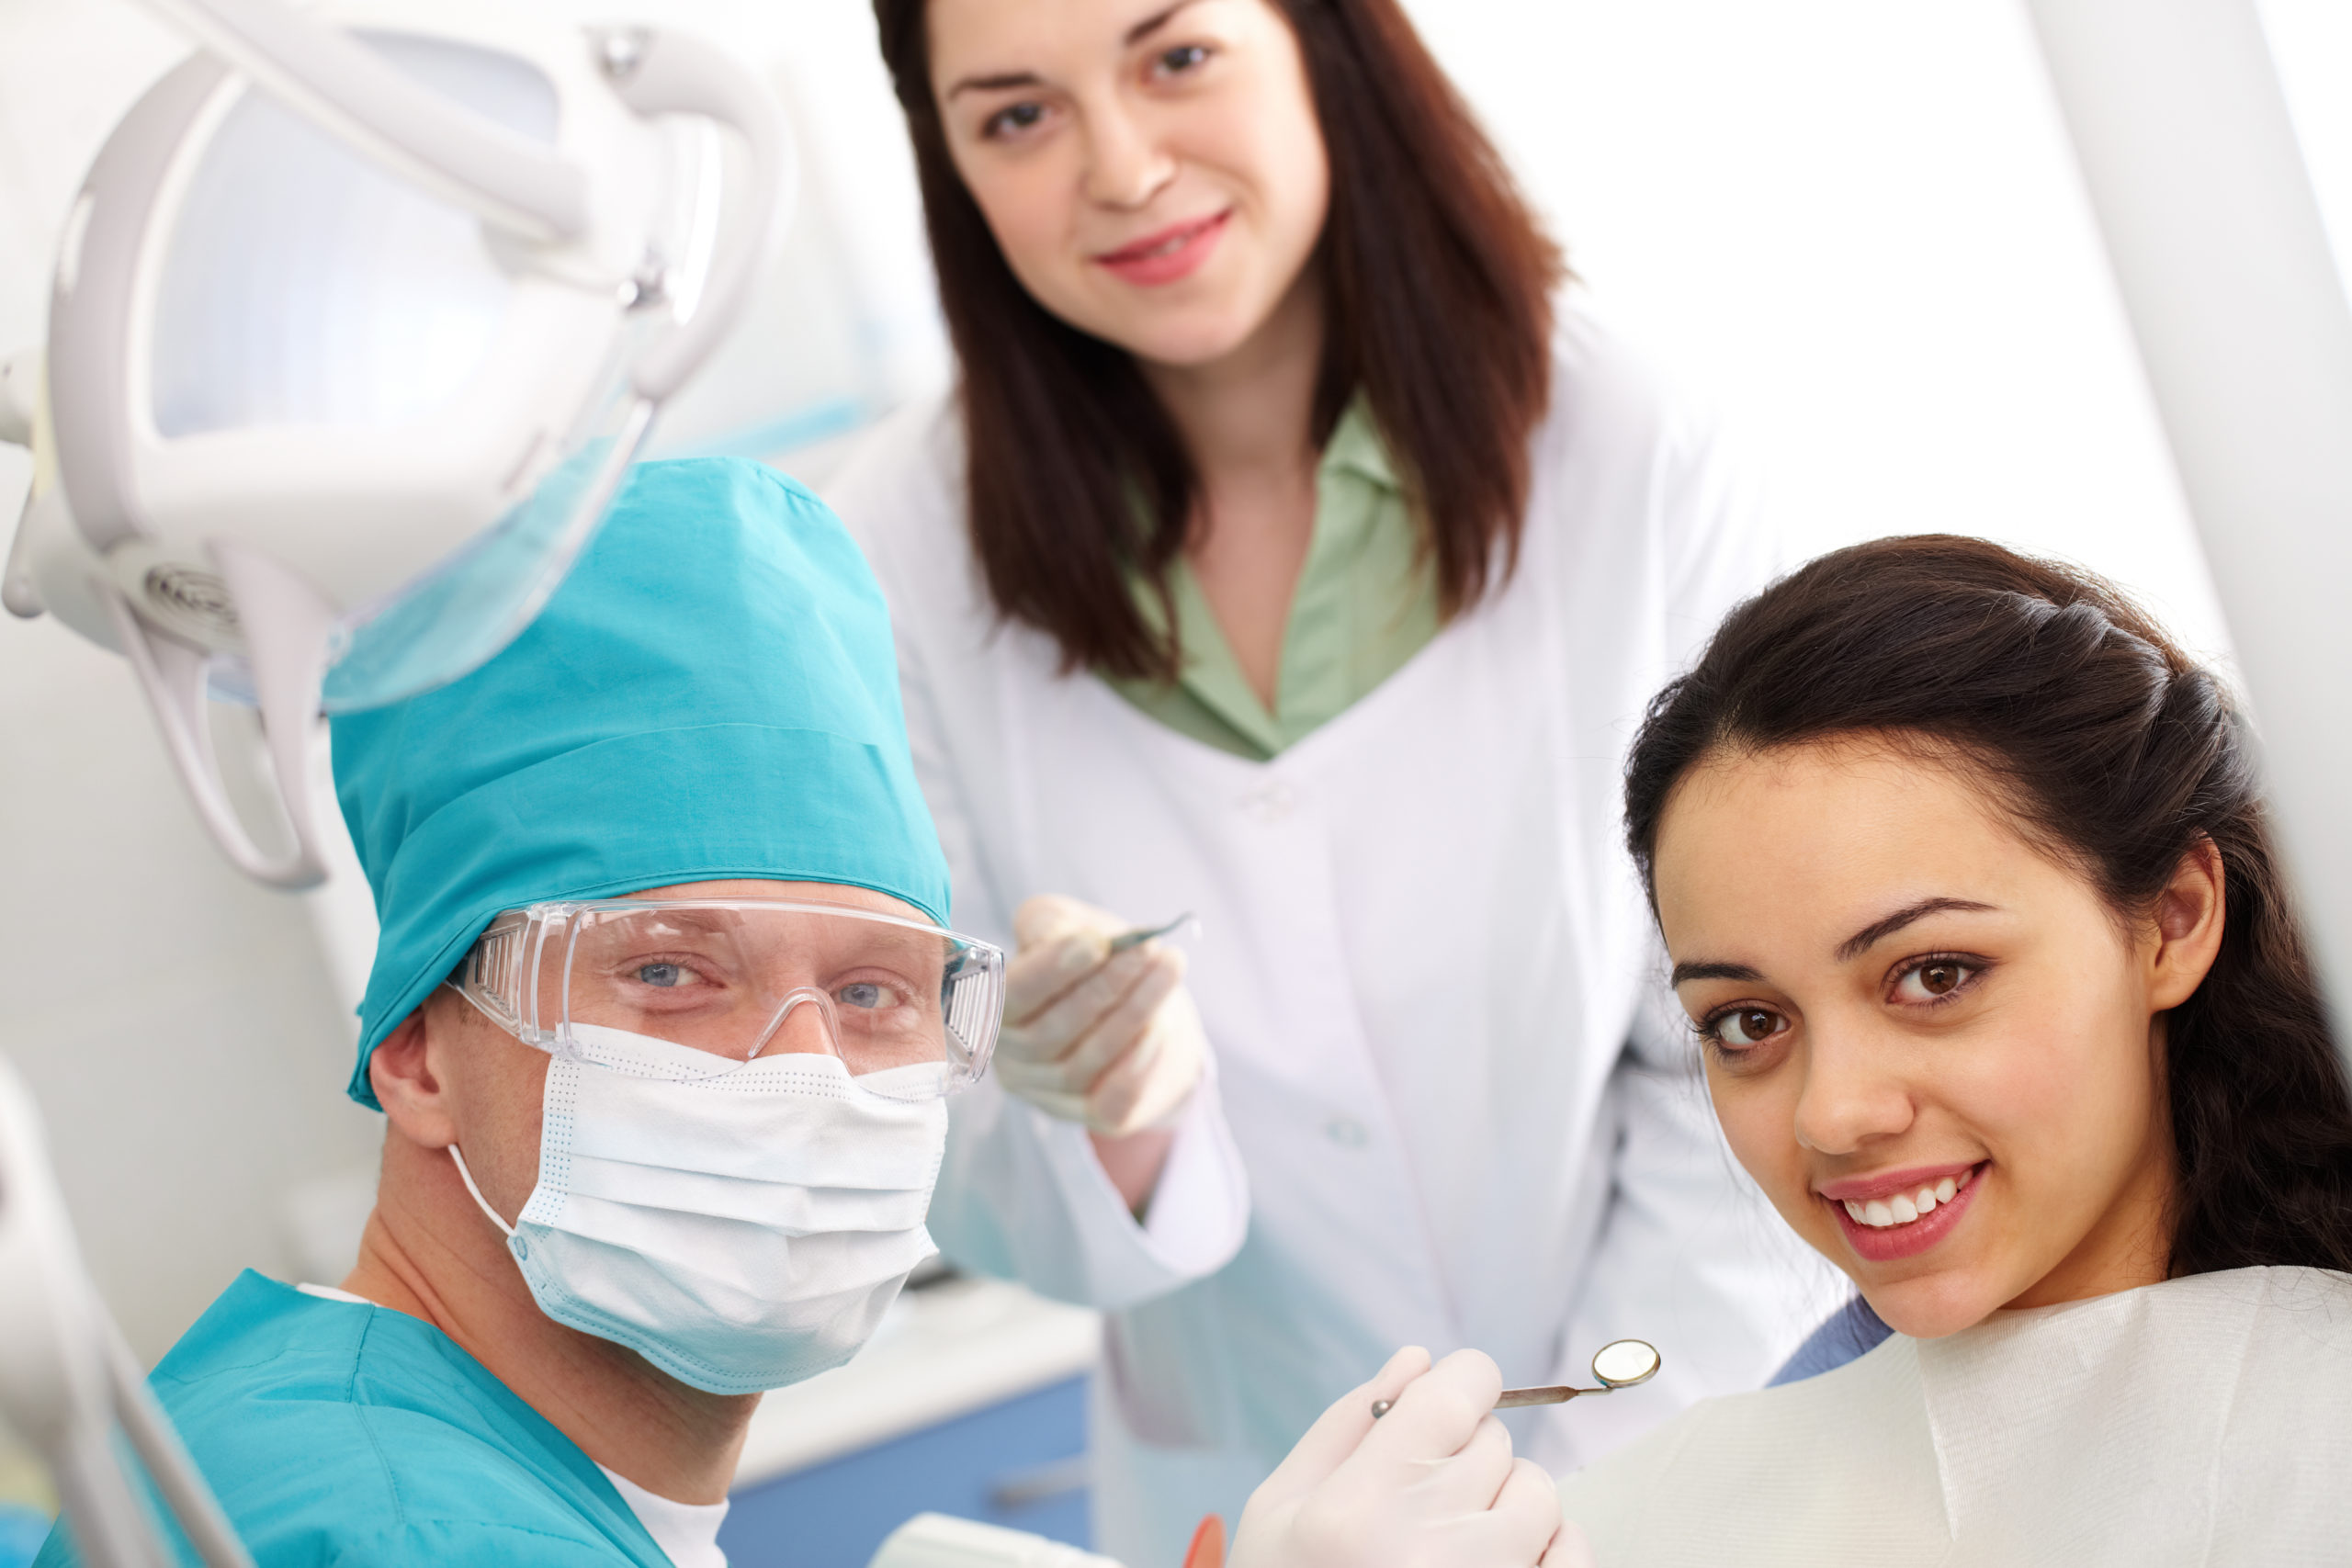 Dentist, his assistant and a patient looking at camera and smiling